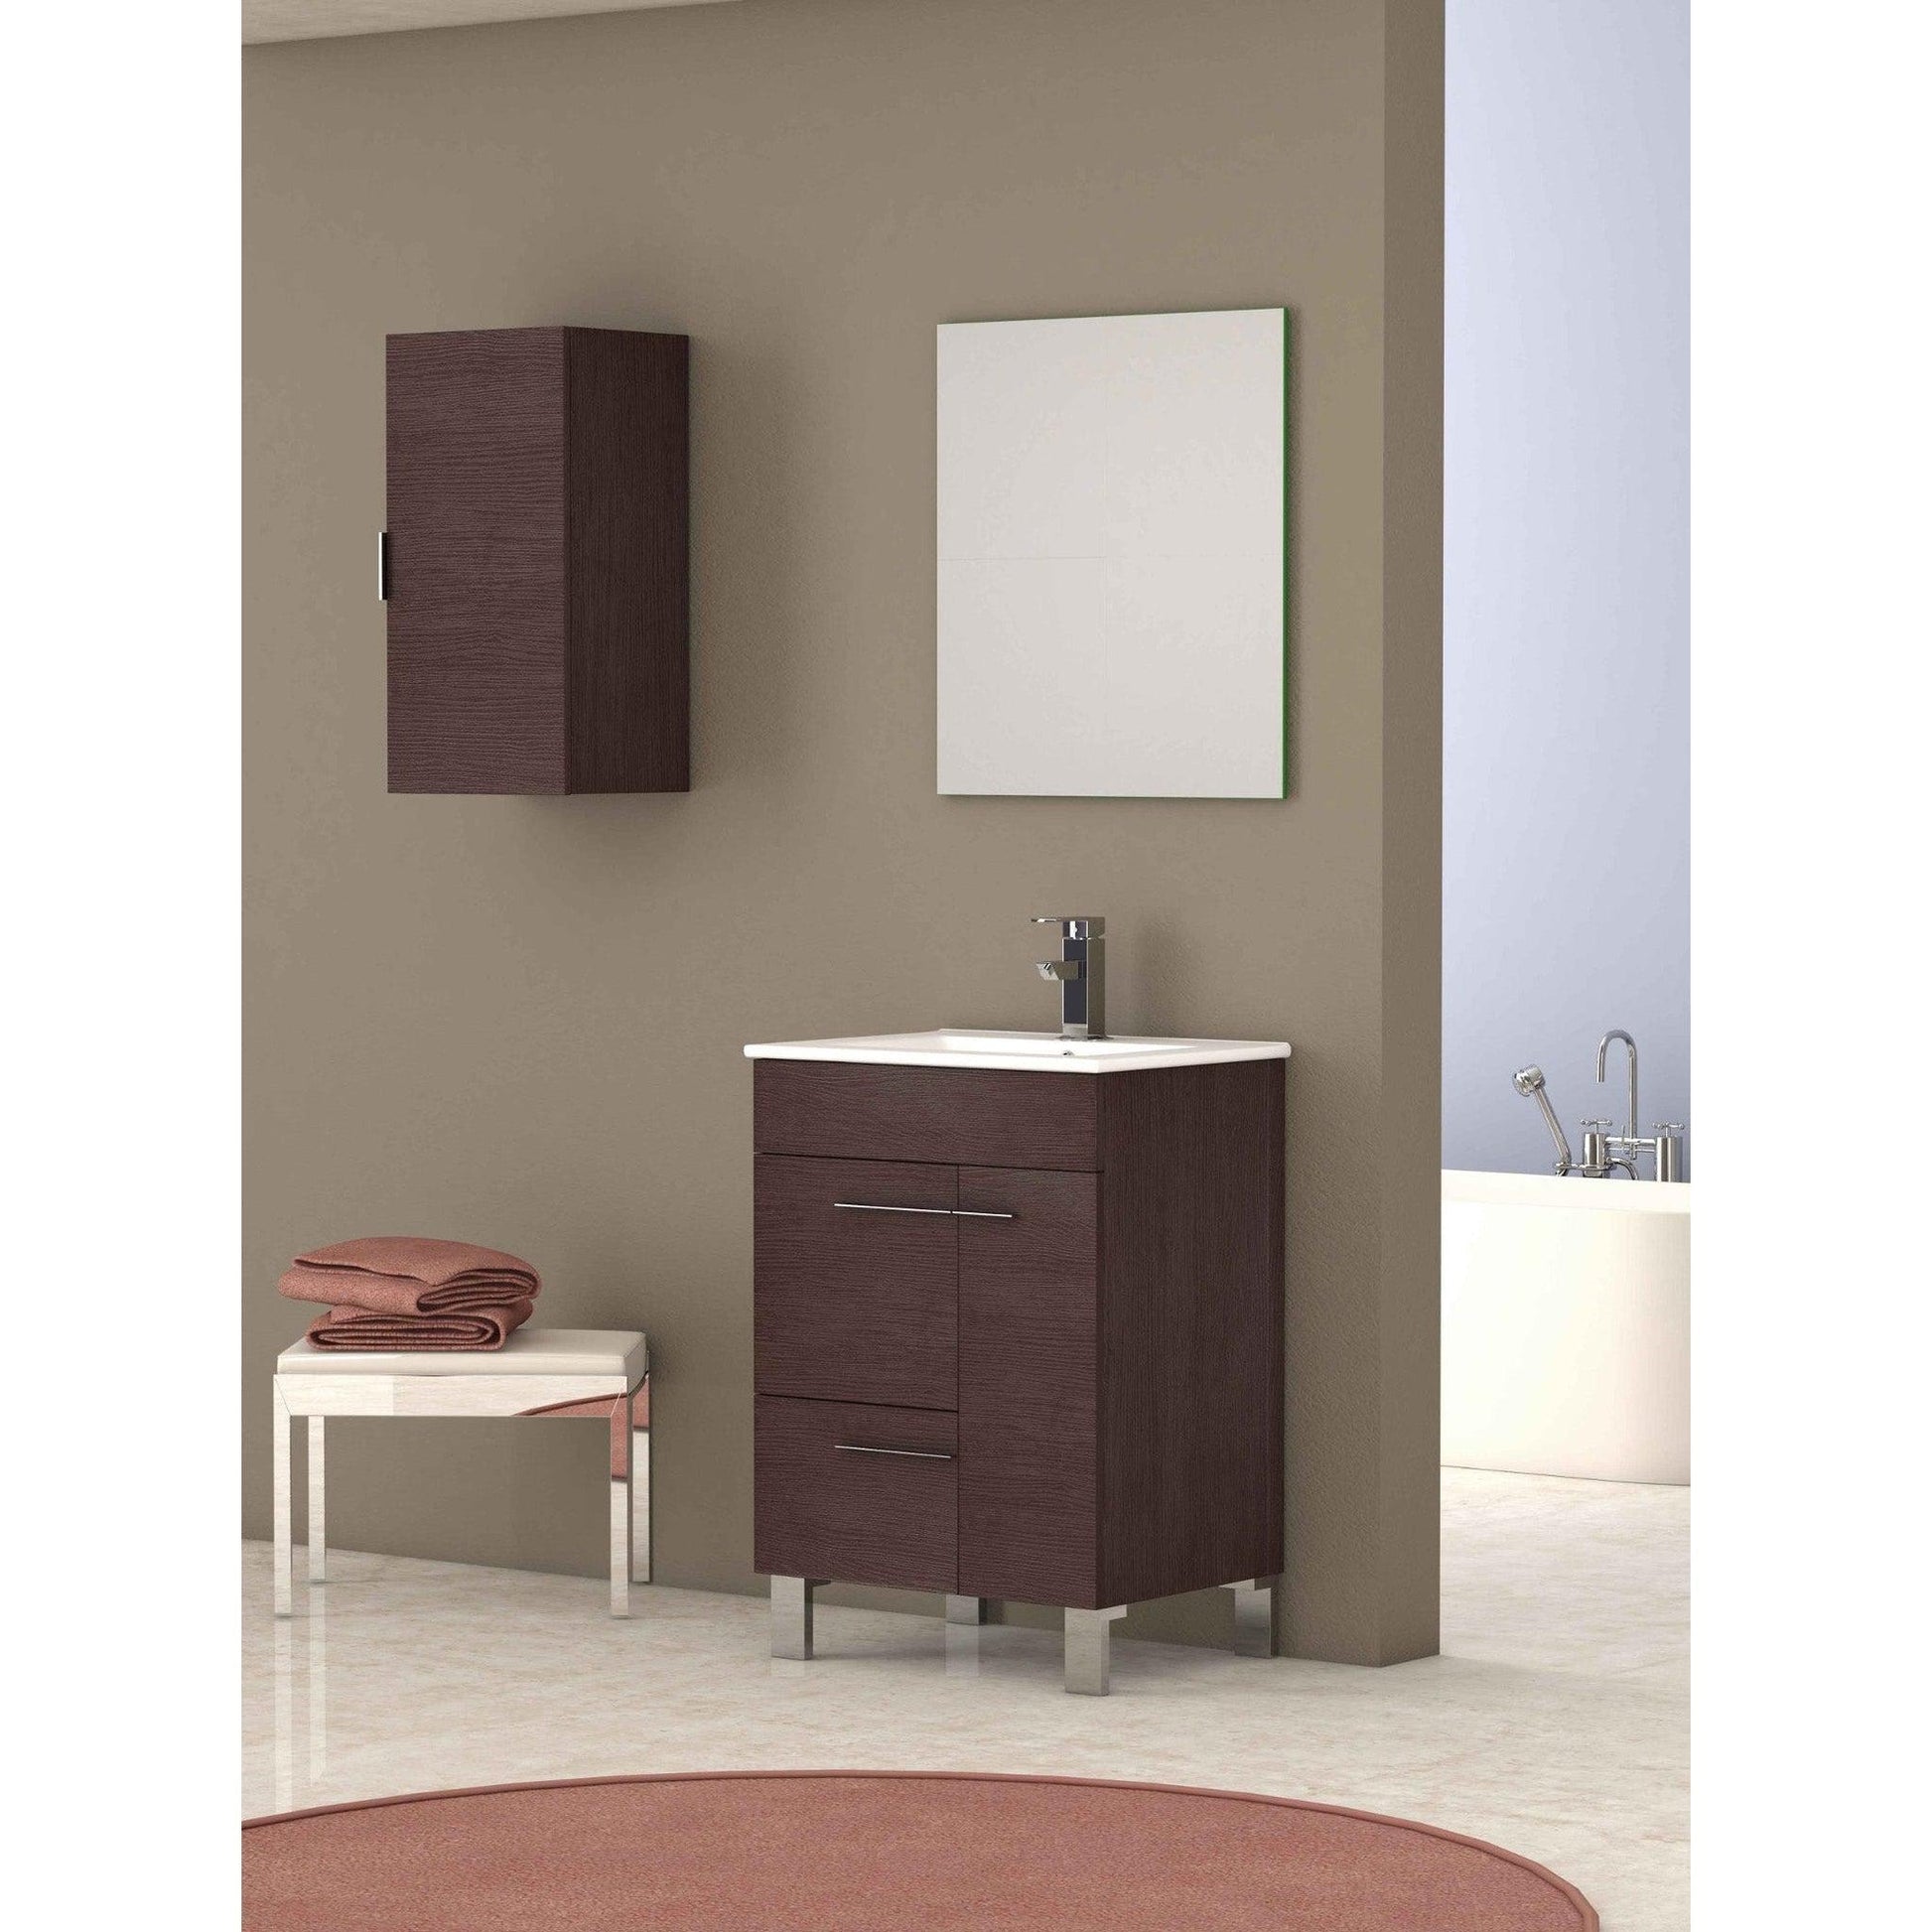 Eviva Cup 24” x 34” Wenge Freestanding Bathroom Vanity With White Integrated Porcelain Sink